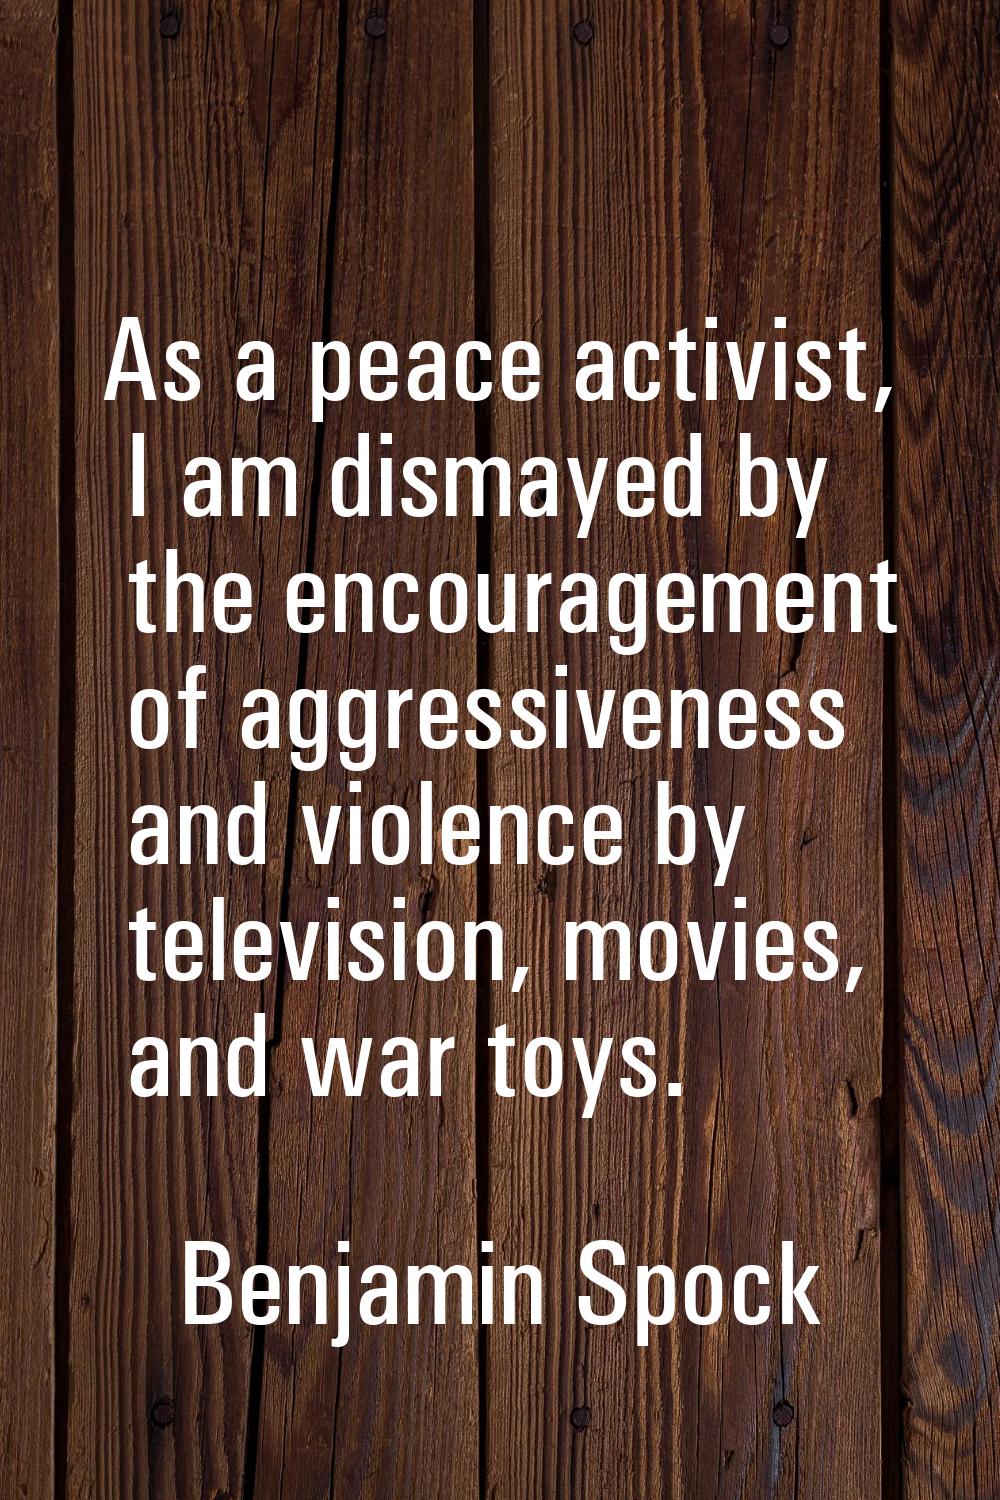 As a peace activist, I am dismayed by the encouragement of aggressiveness and violence by televisio